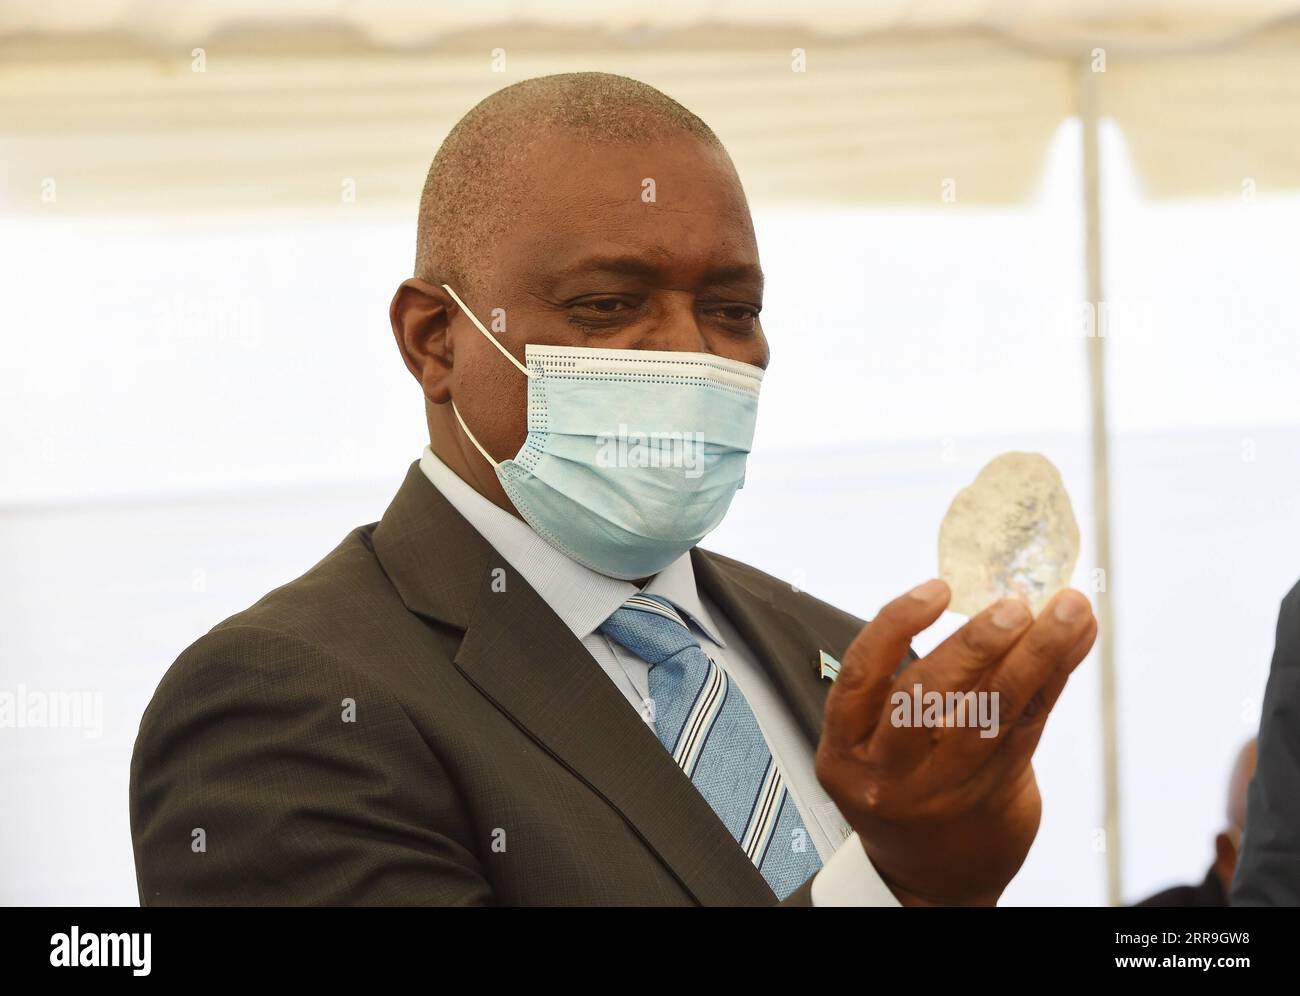 210616 -- GABORONE, June 16, 2021 -- Botswana President Mokgweetsi Masisi looks at the 1,098.30-carat diamond discovered by the Debswana Diamond Company in Gaborone, Botswana, on June 16, 2021. The Debswana Diamond Company on Wednesday presented a 1,098.30-carat diamond to Botswana President Mokgweetsi Masisi and the Cabinet in Gaborone, capital of Botswana. According to the company, the stone, discovered on June 1 from the south Kimberlite pipe at Jwaneng mine in the southern part of the country, is the largest of gem quality in the history of the company, a joint venture between the Botswana Stock Photo